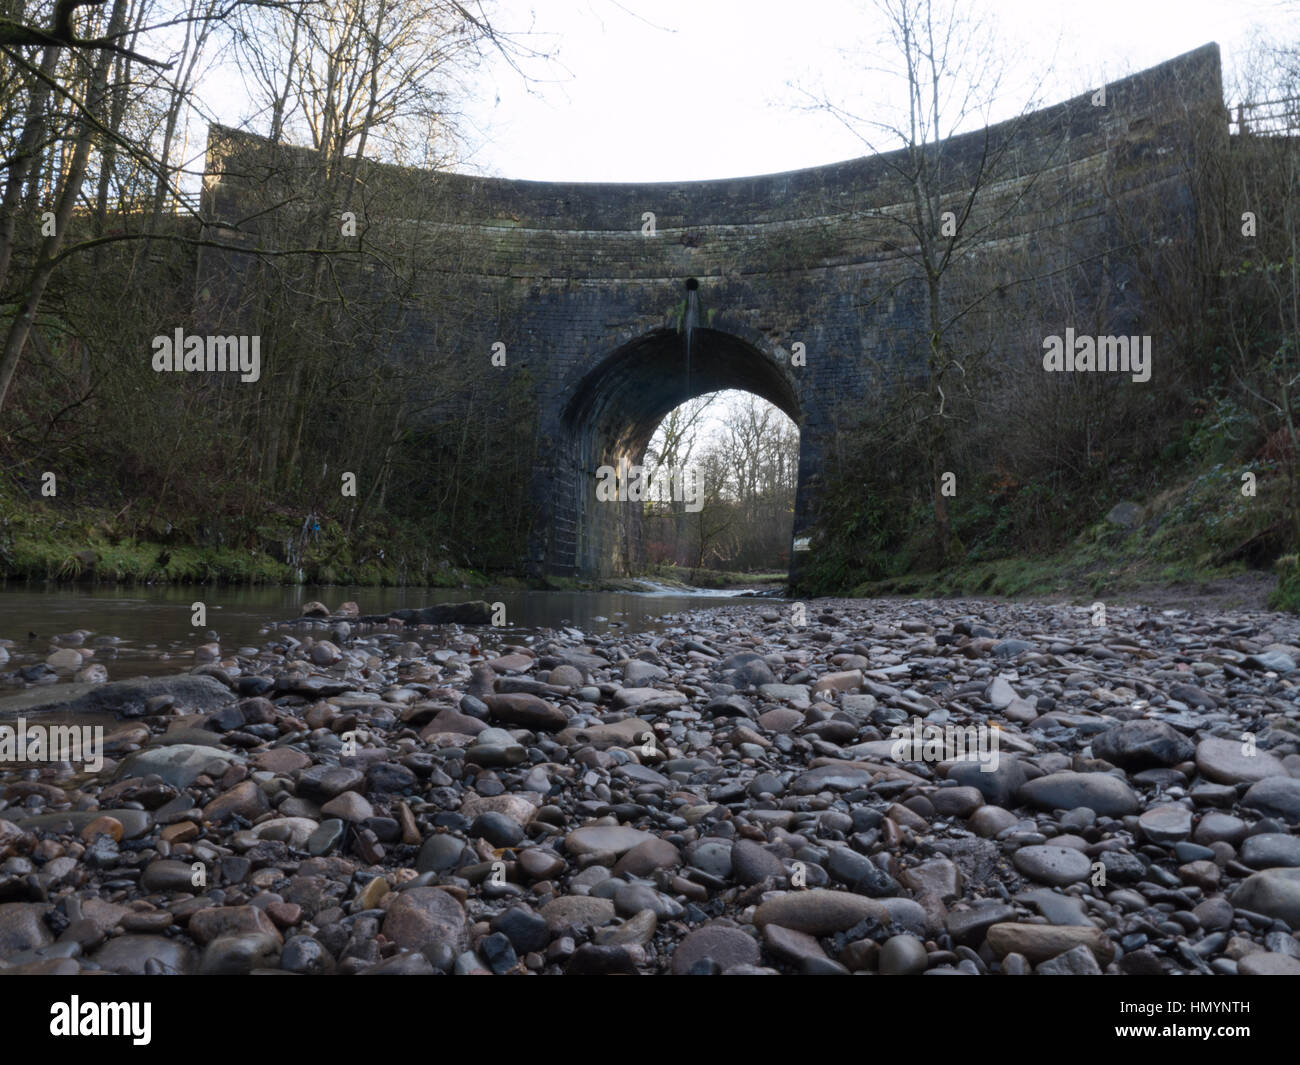 The River Medlock running under the arch of a bridge at Daisy Nook Country Park in Oldham, Greater Manchester Stock Photo